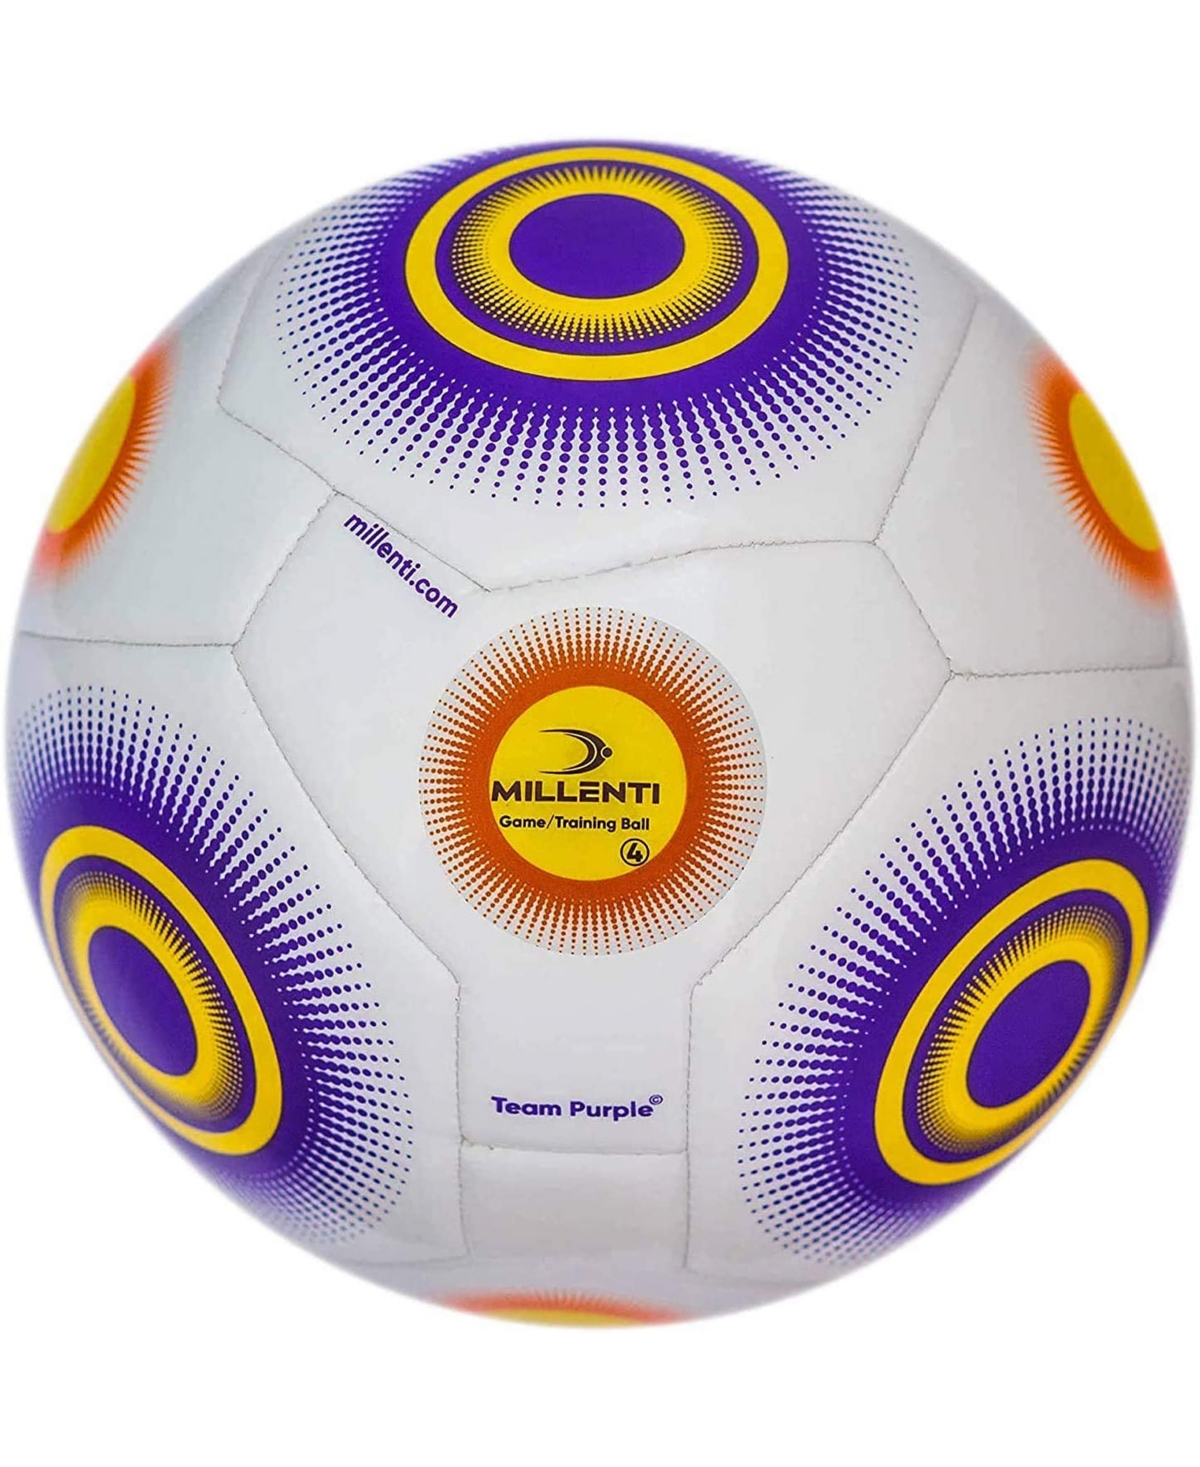 Millenti Us Soccer Ball Official Size 4 Youth-team Training Soccer Ball - With High-visibility, Easy-to-track In Purple/white